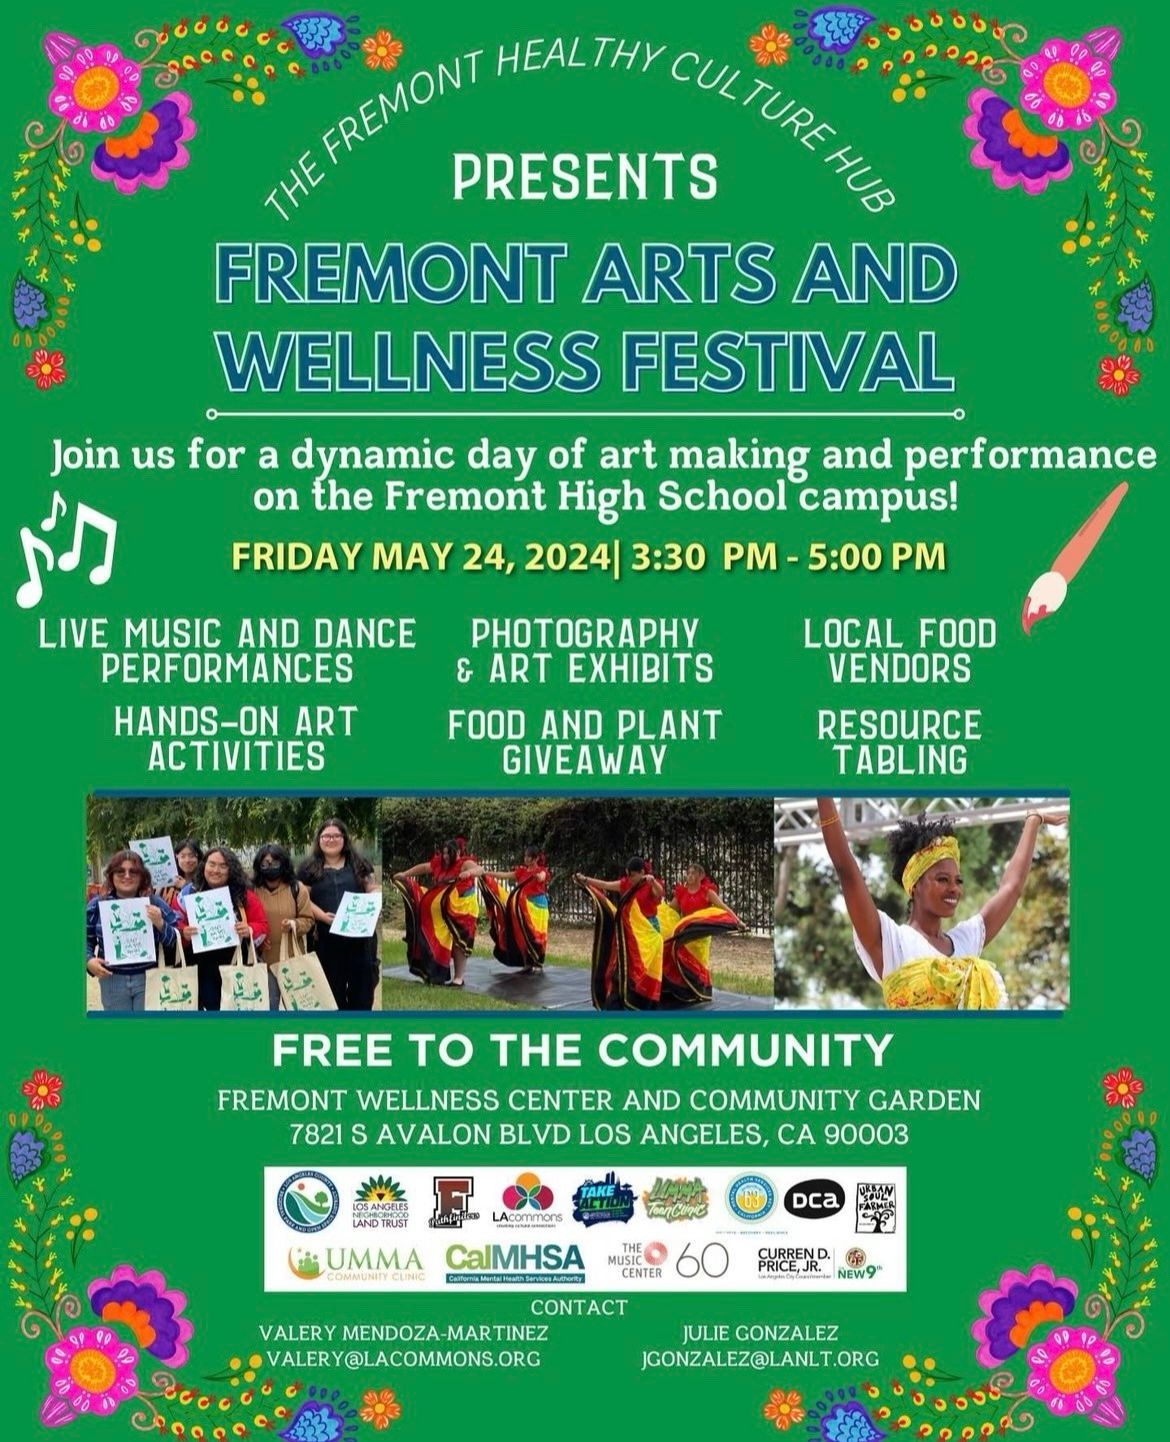 Fremont Arts and Wellness Festival